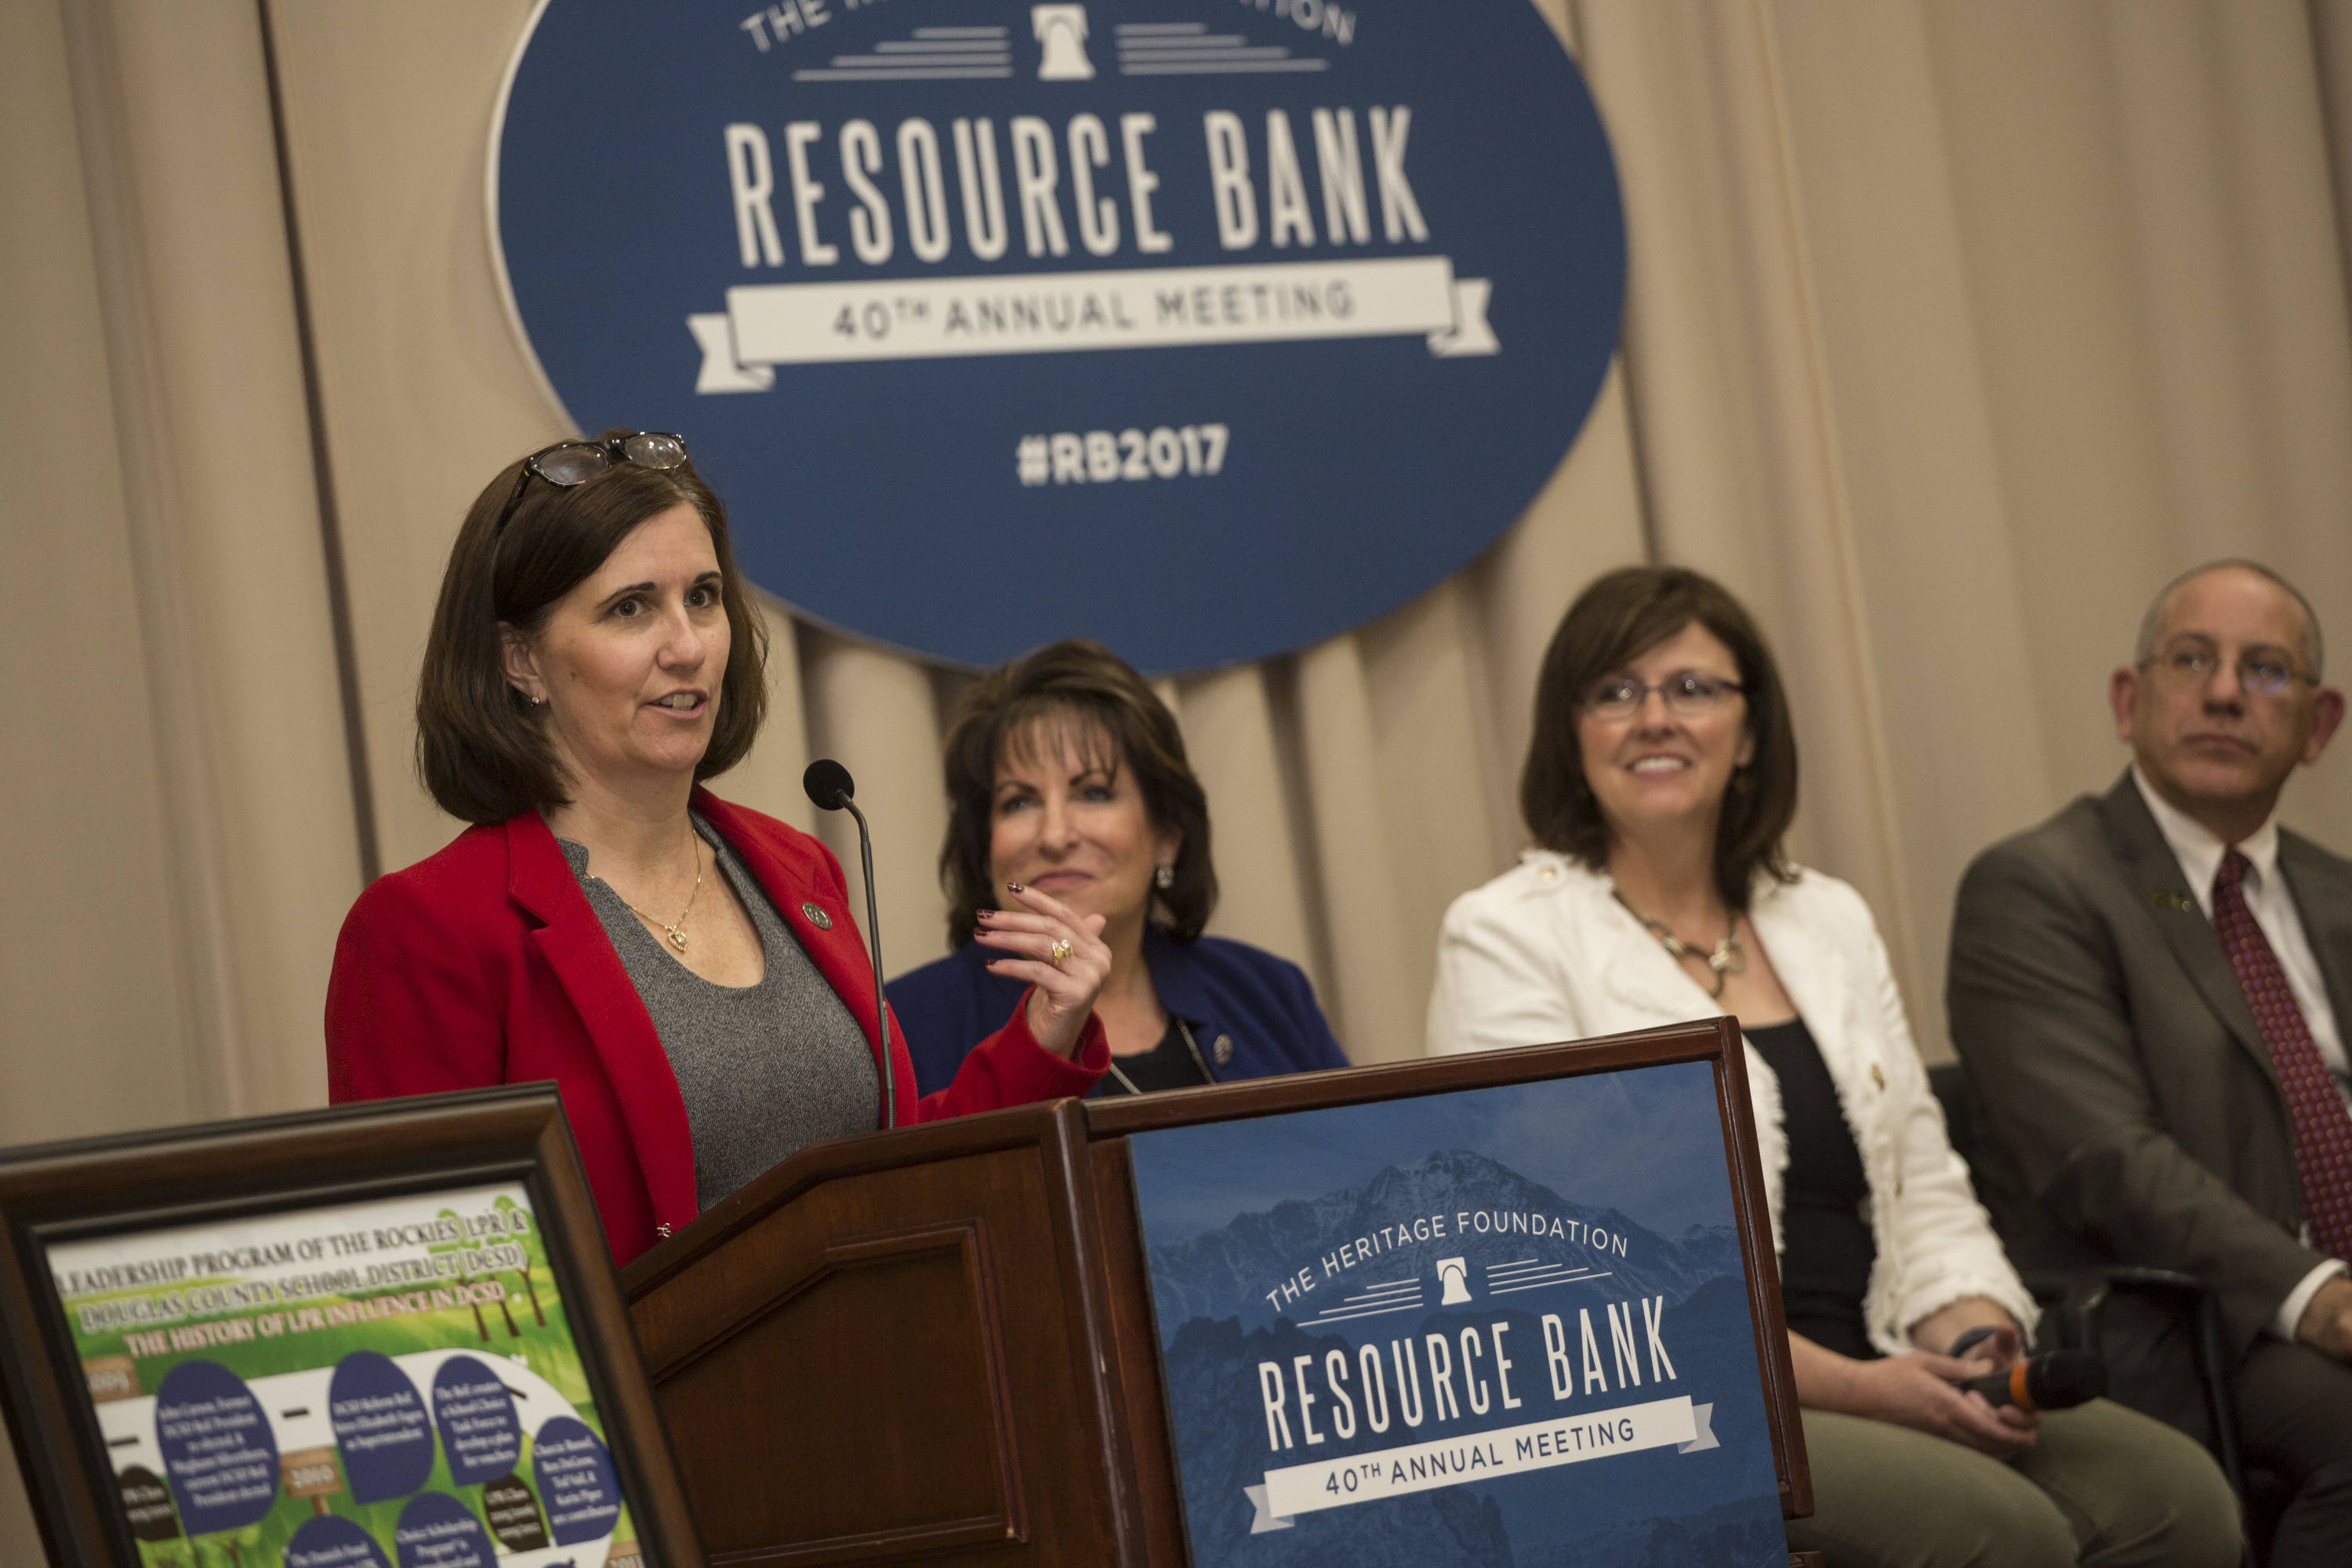 Resource Bank Meeting The Heritage Foundation